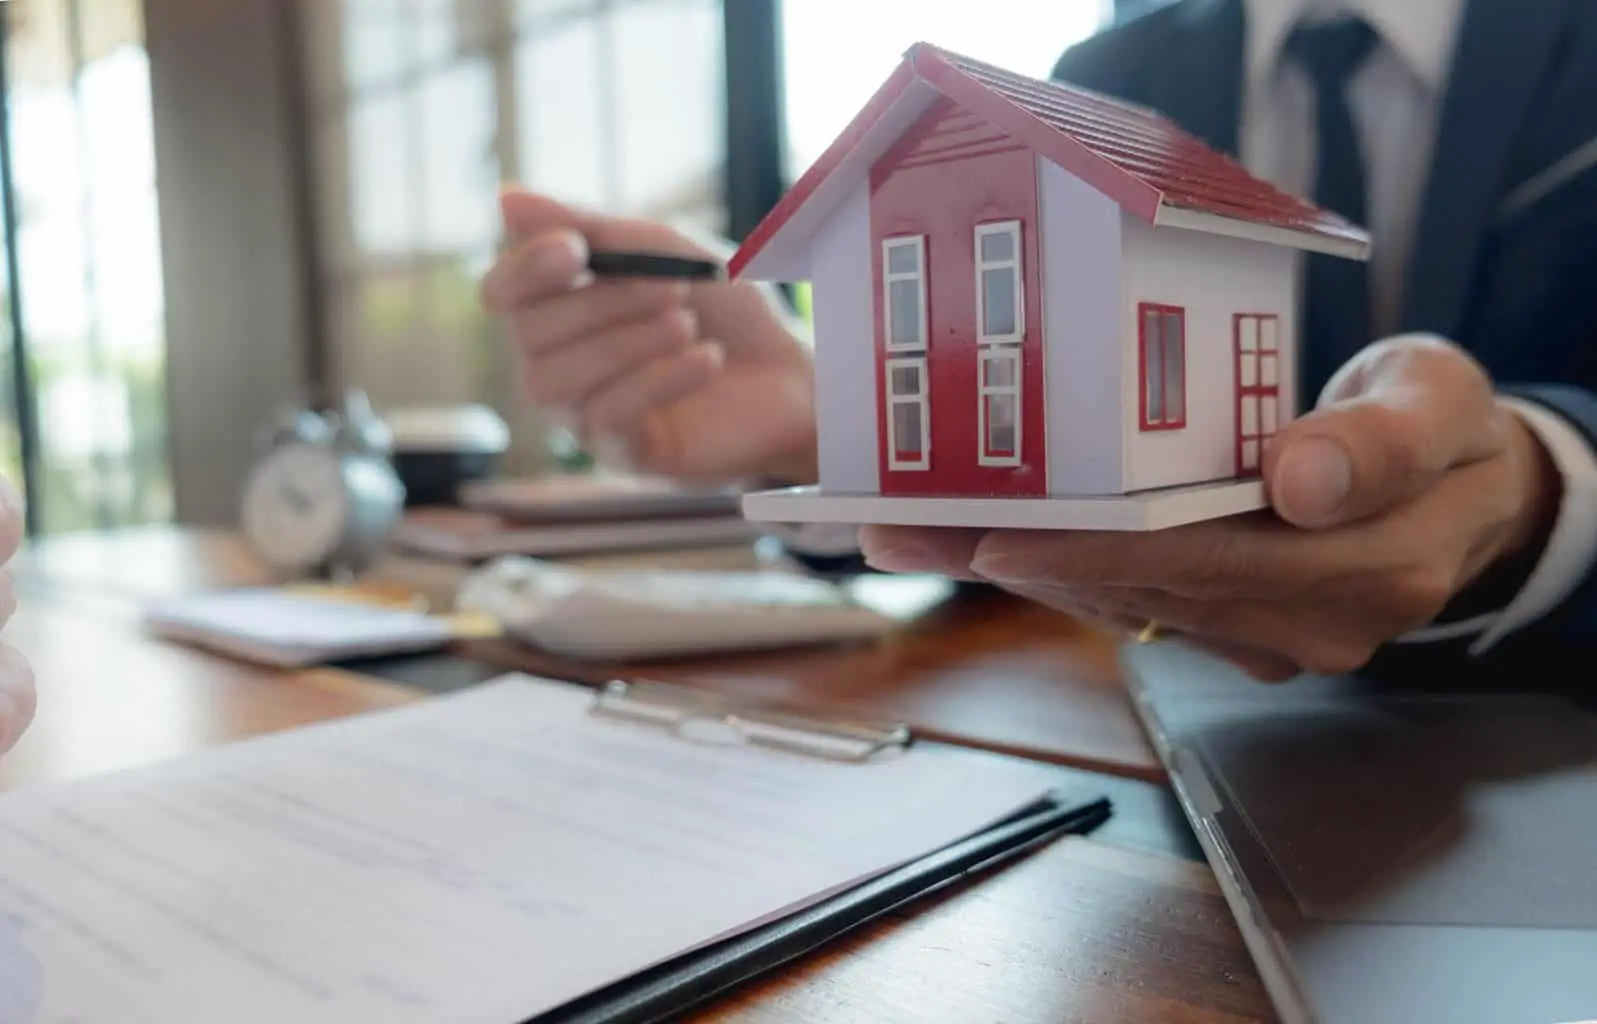 How to Become a Mortgage Advisor